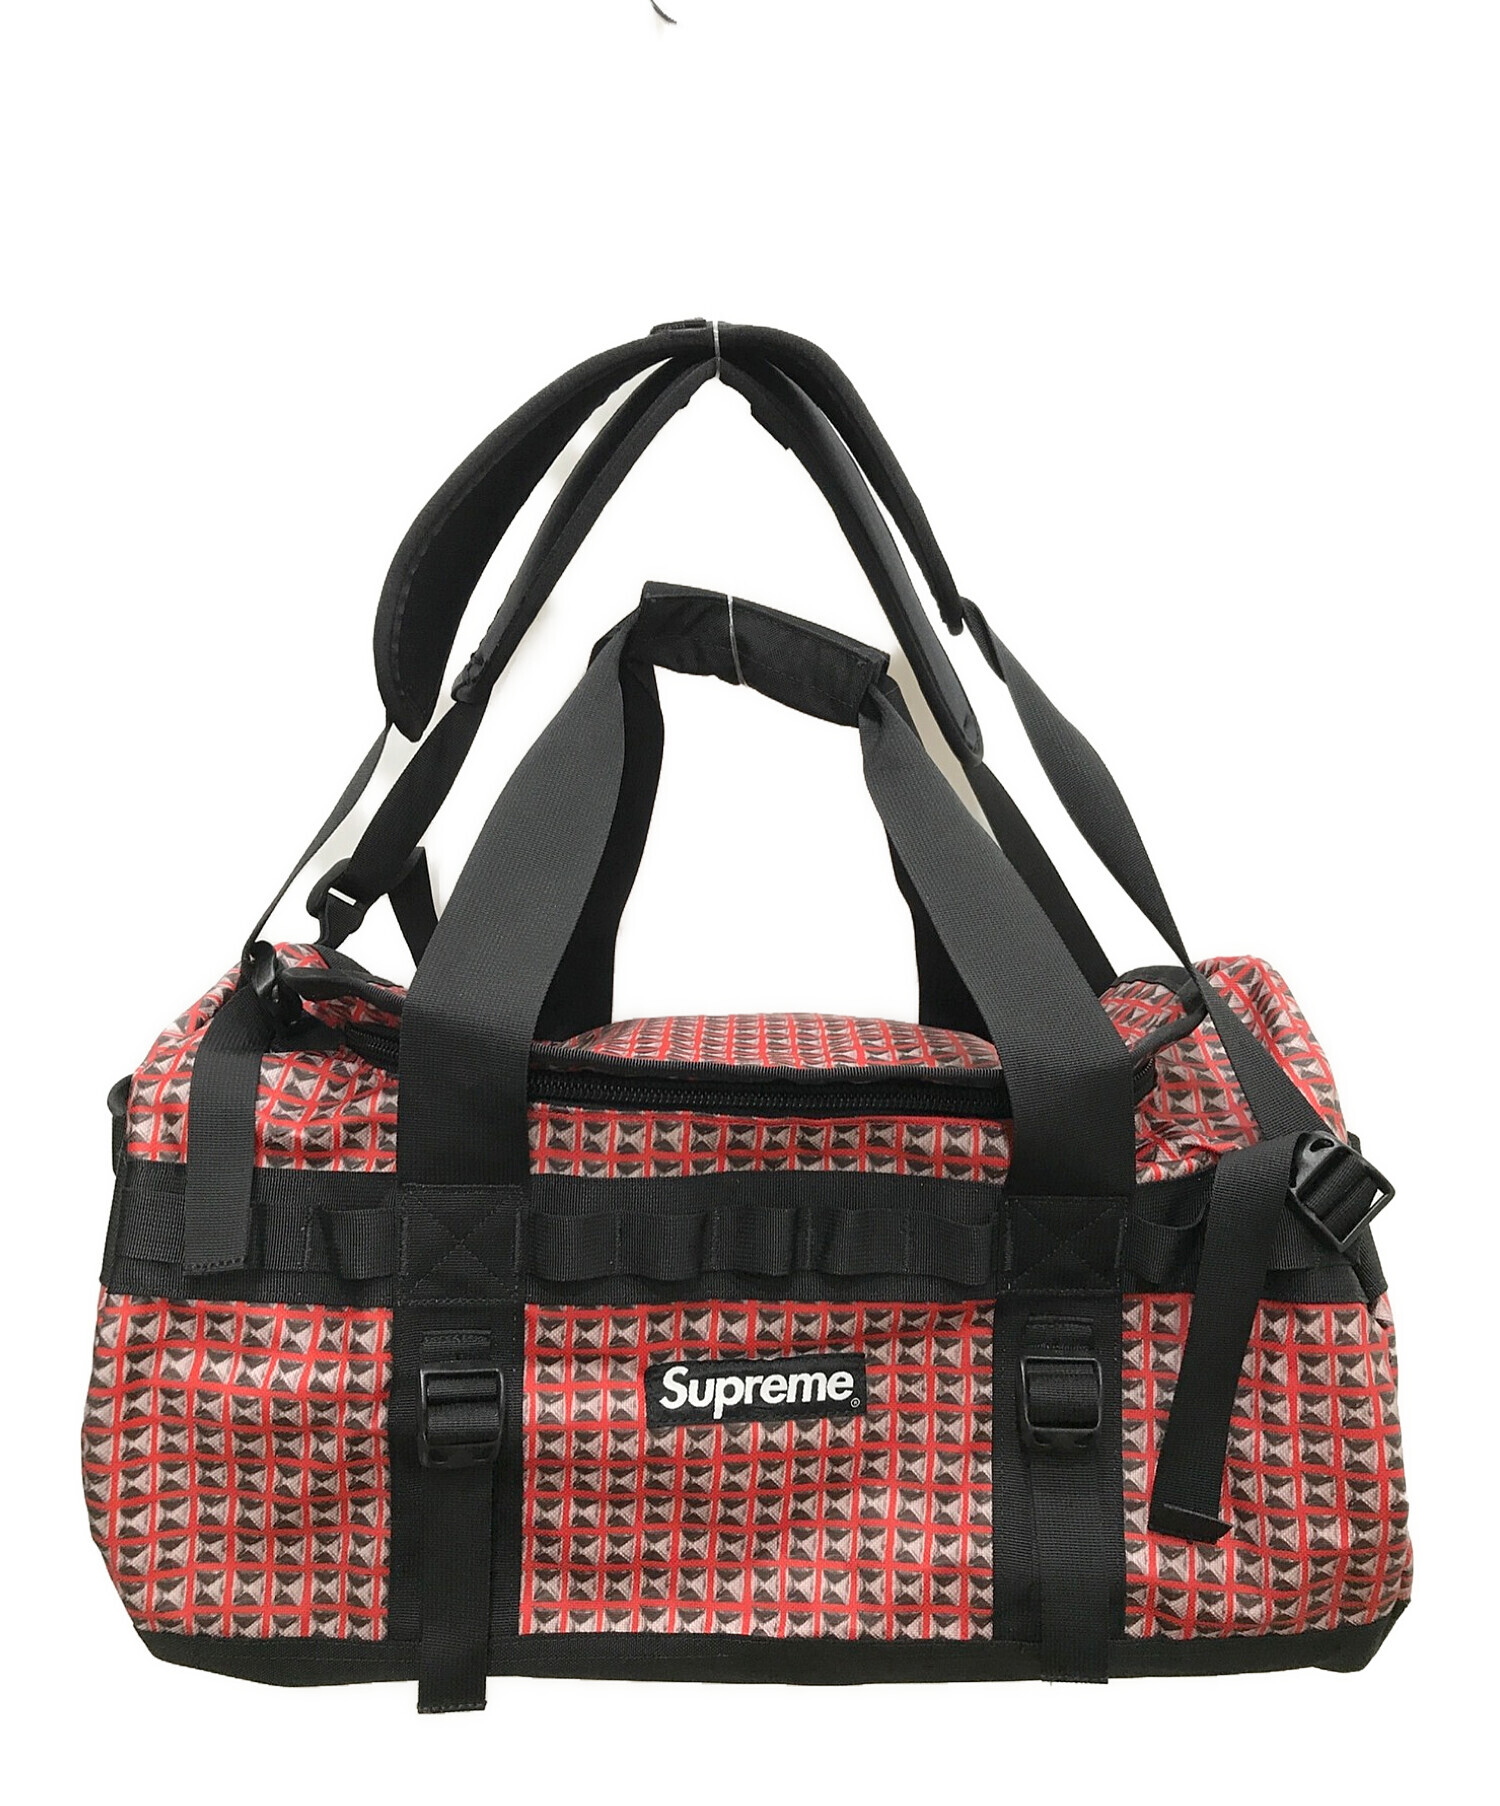 Supreme®/The North Face® Camp Duffle Bag